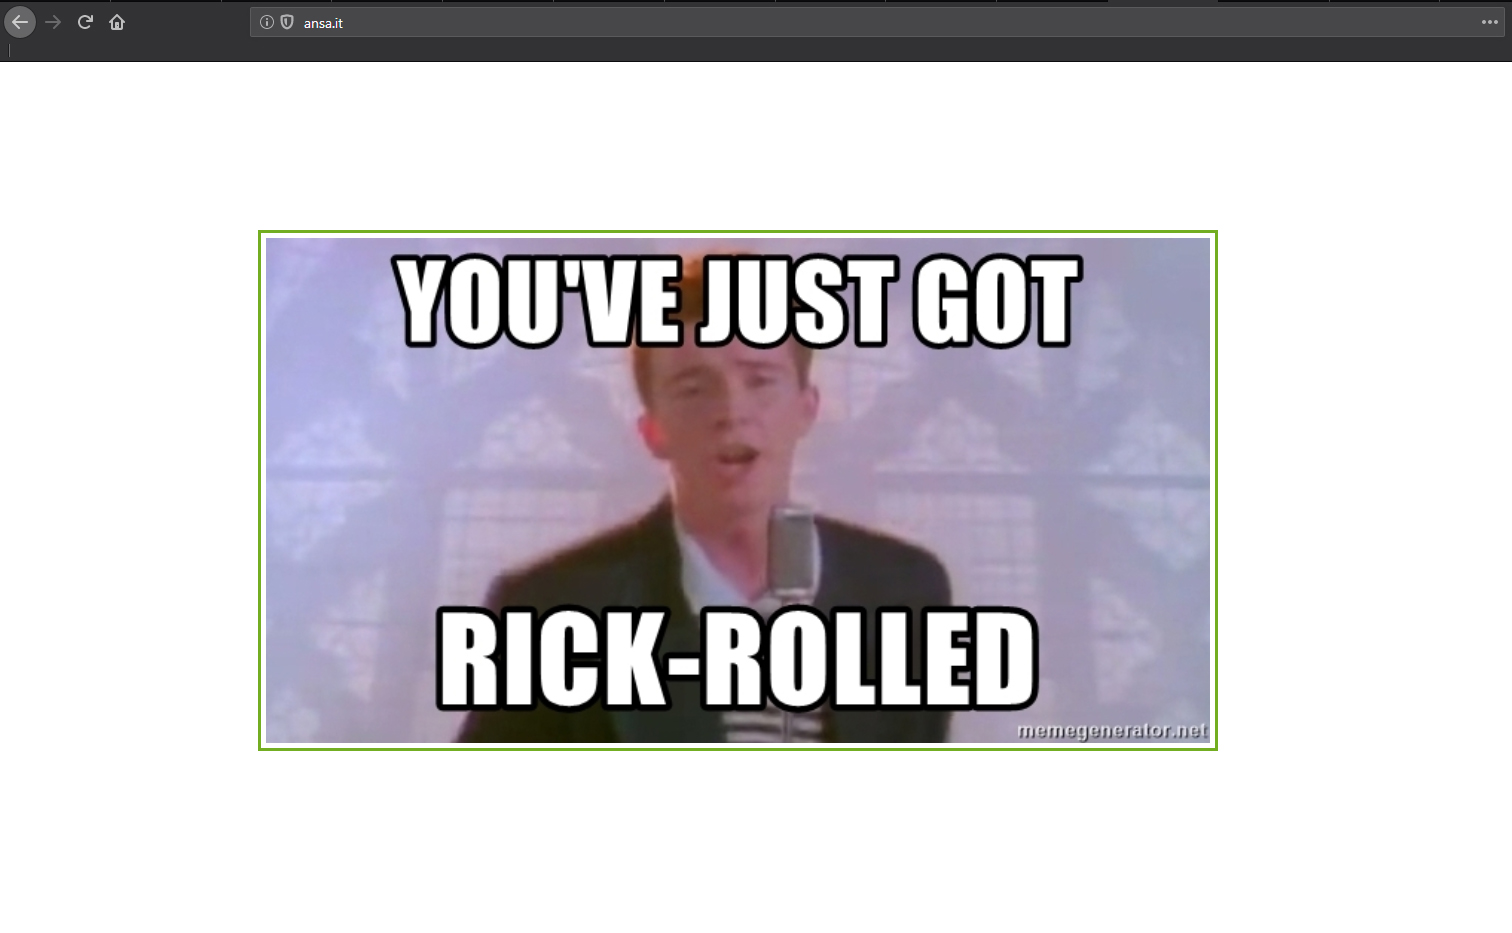 GitHub - IBXCODECAT/Windows10-Rickroll: A meme application that can replace  task manager with a rick roll and can also rick roll a user on startup!